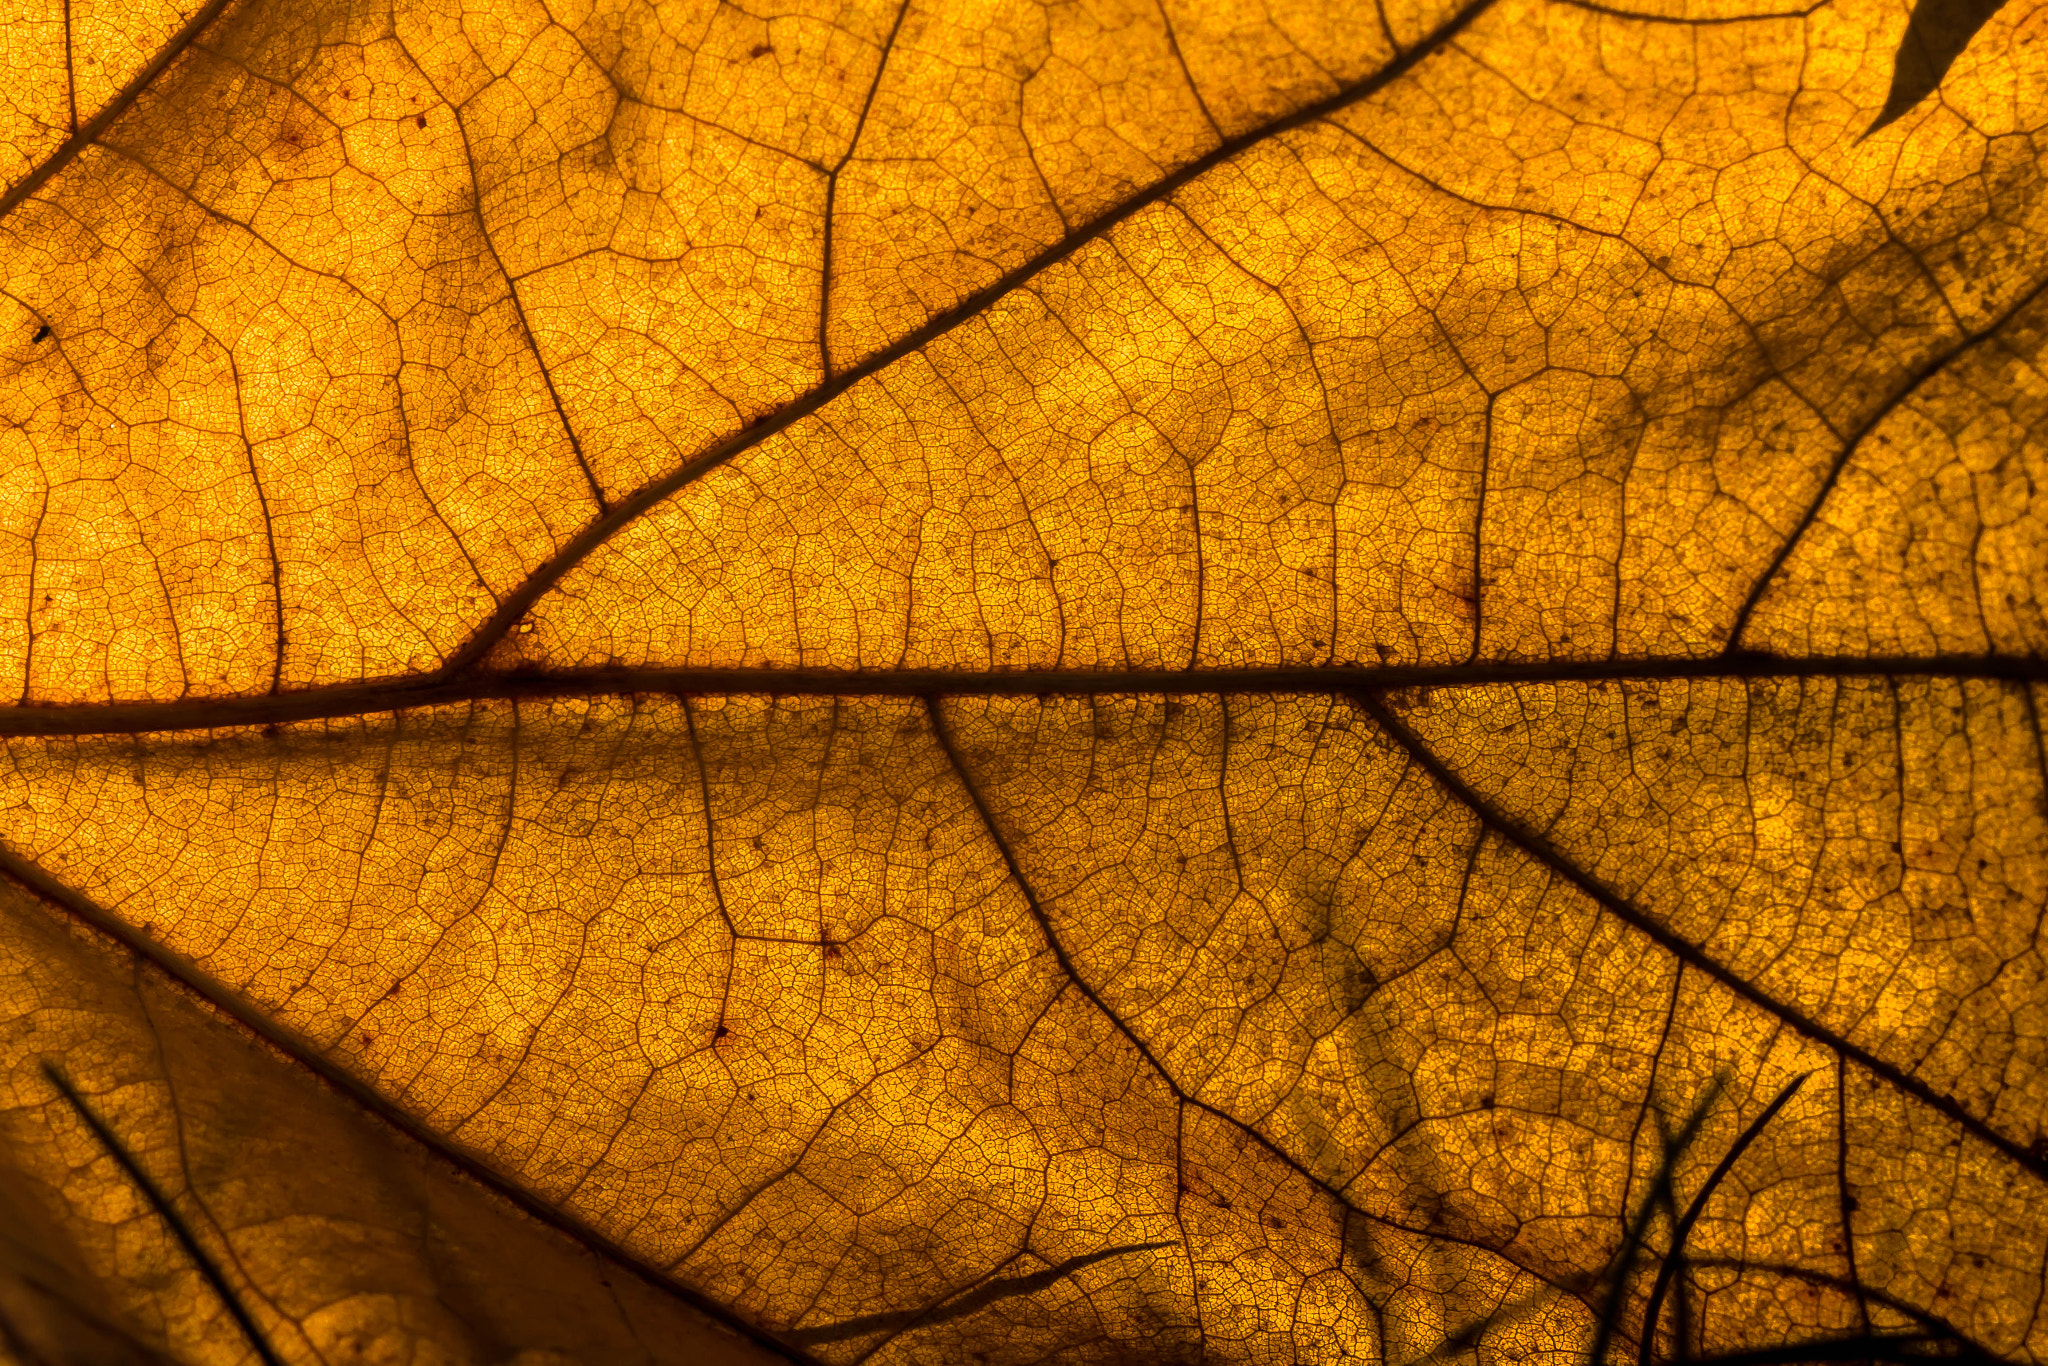 Inners of a leaf by Jaanus Post on 500px.com